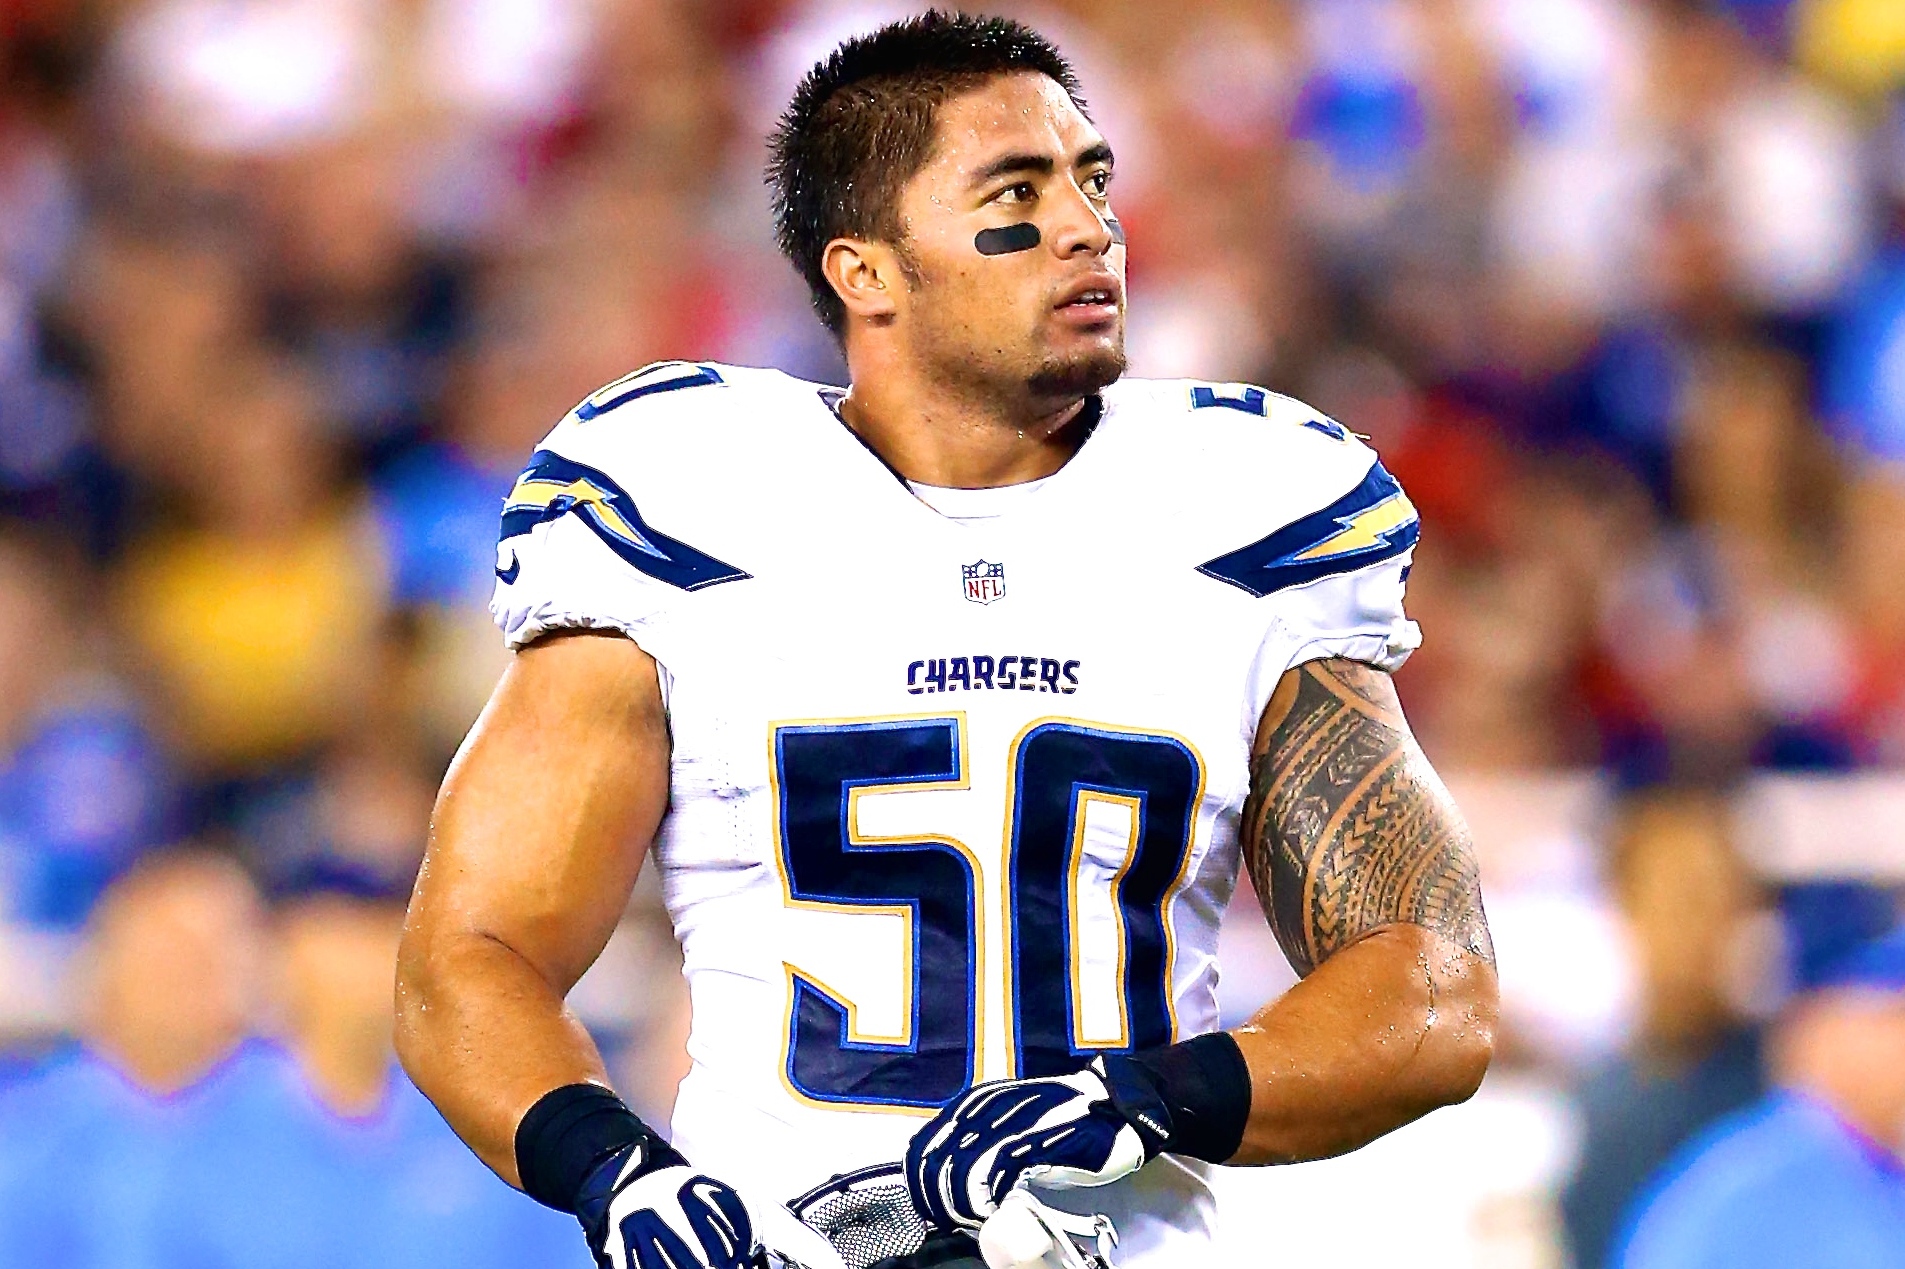 Manti Te'o Injury: Updates on Chargers LB's Foot and Return